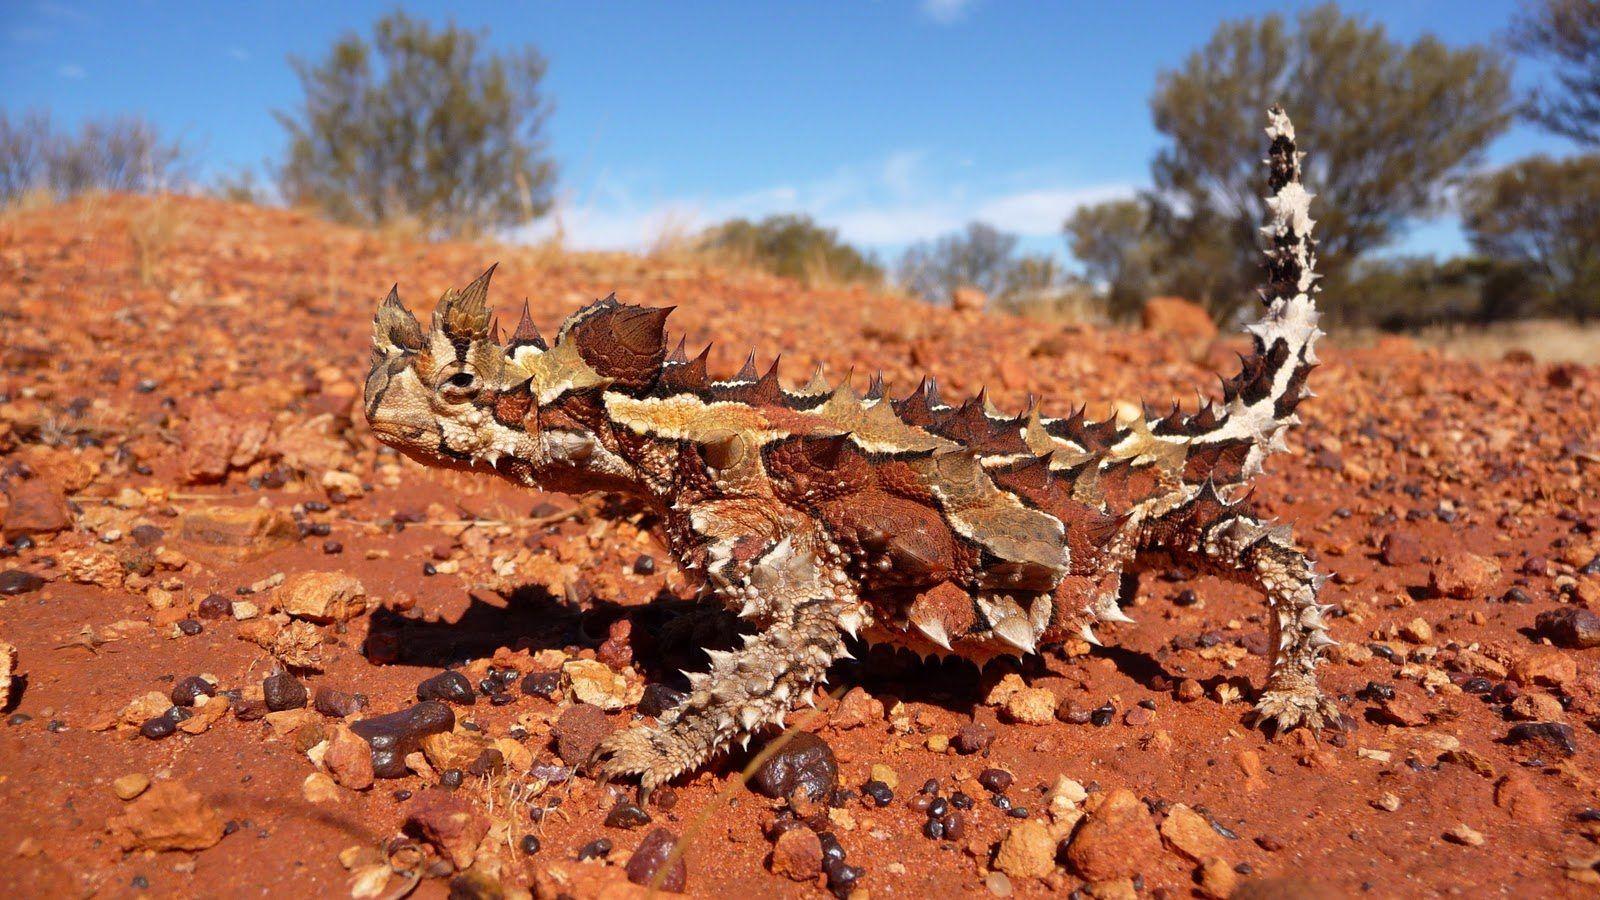 Thorny devils drink water with their body,